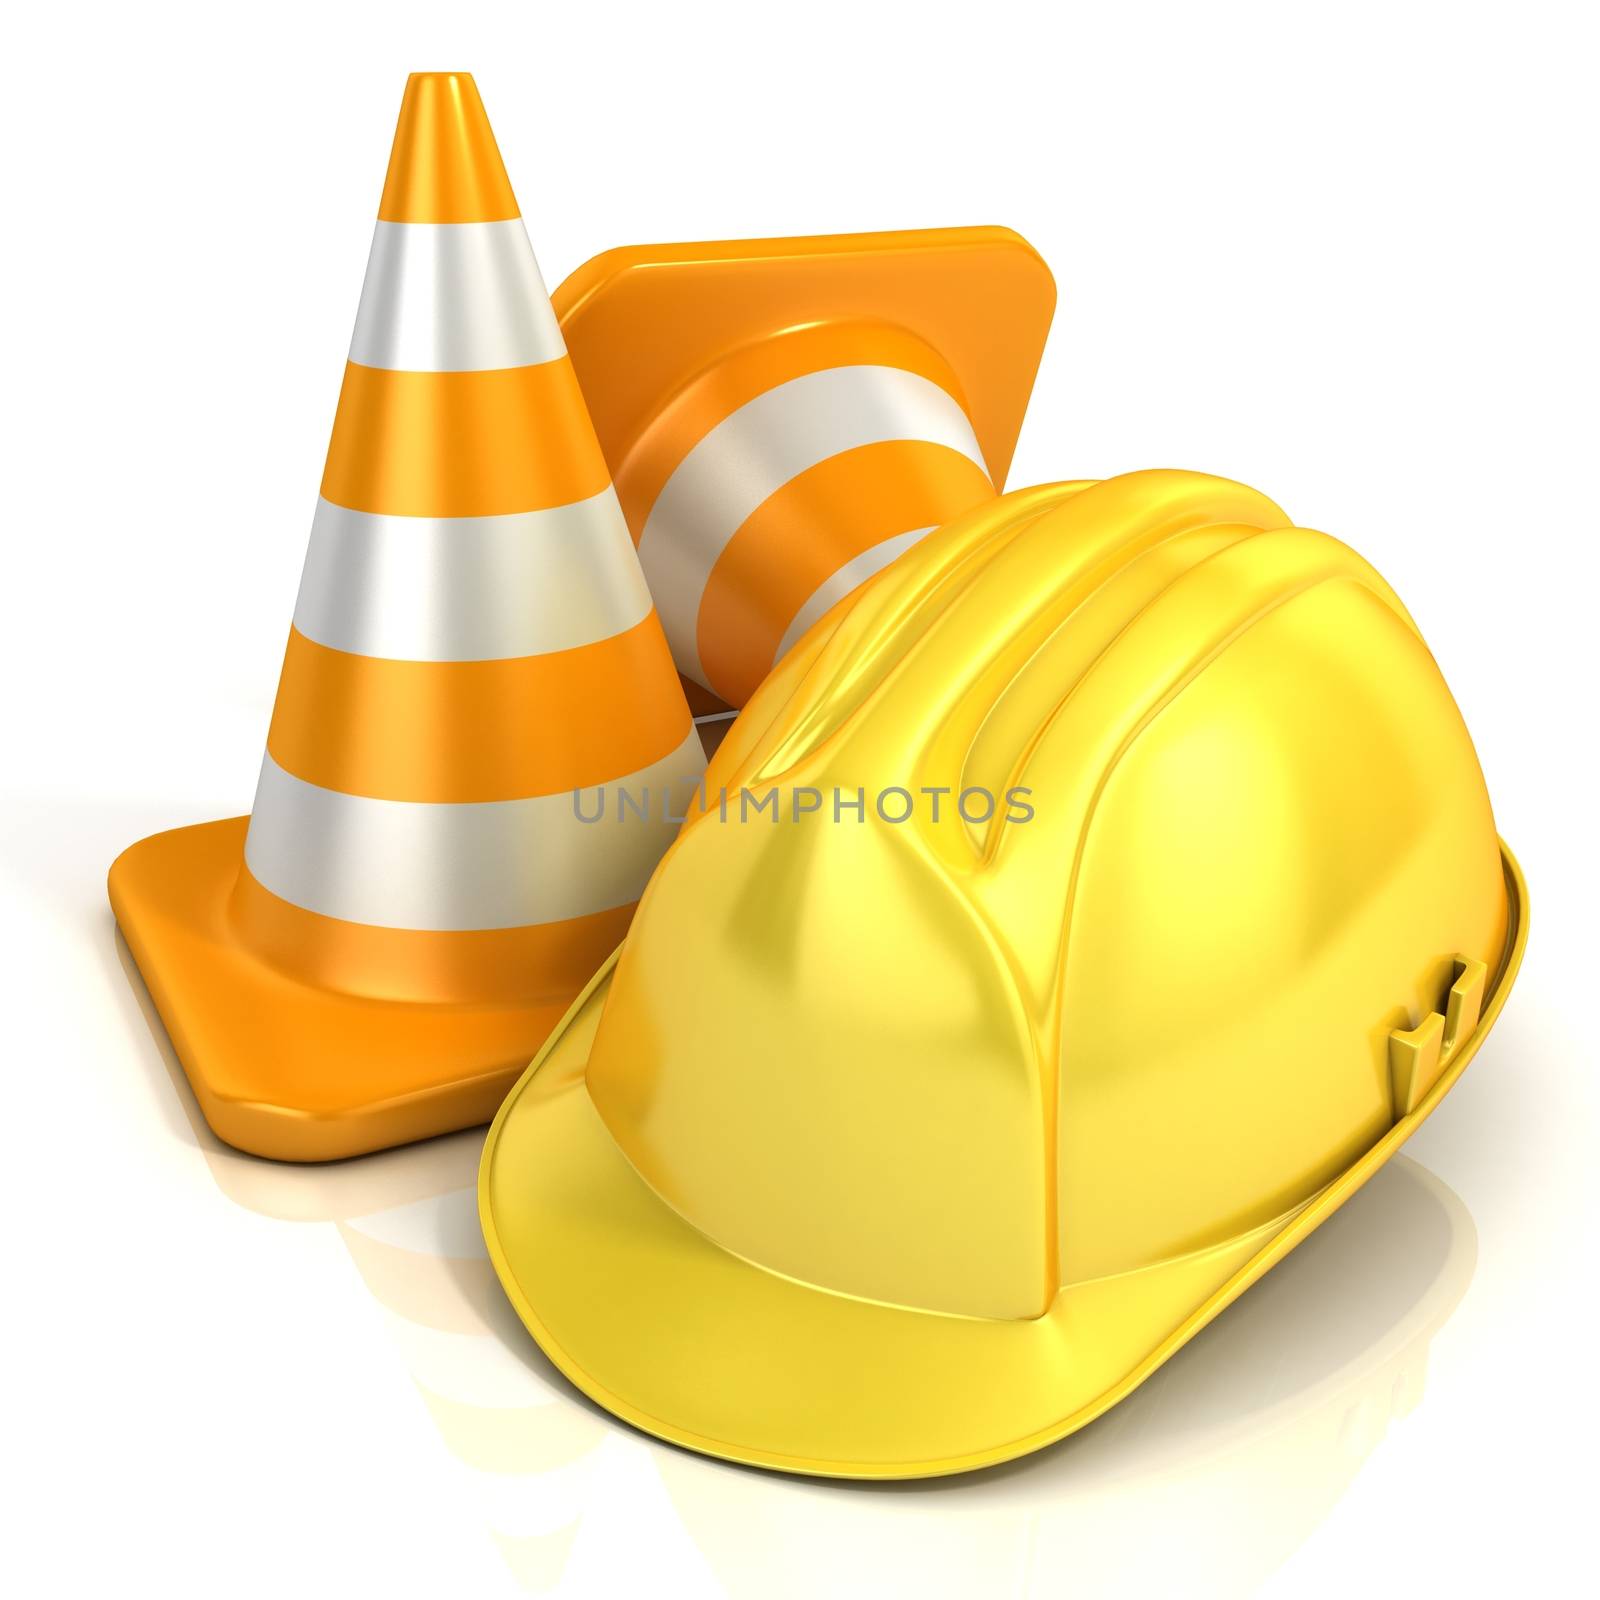 Traffic cones and safety helmet isolated on white background